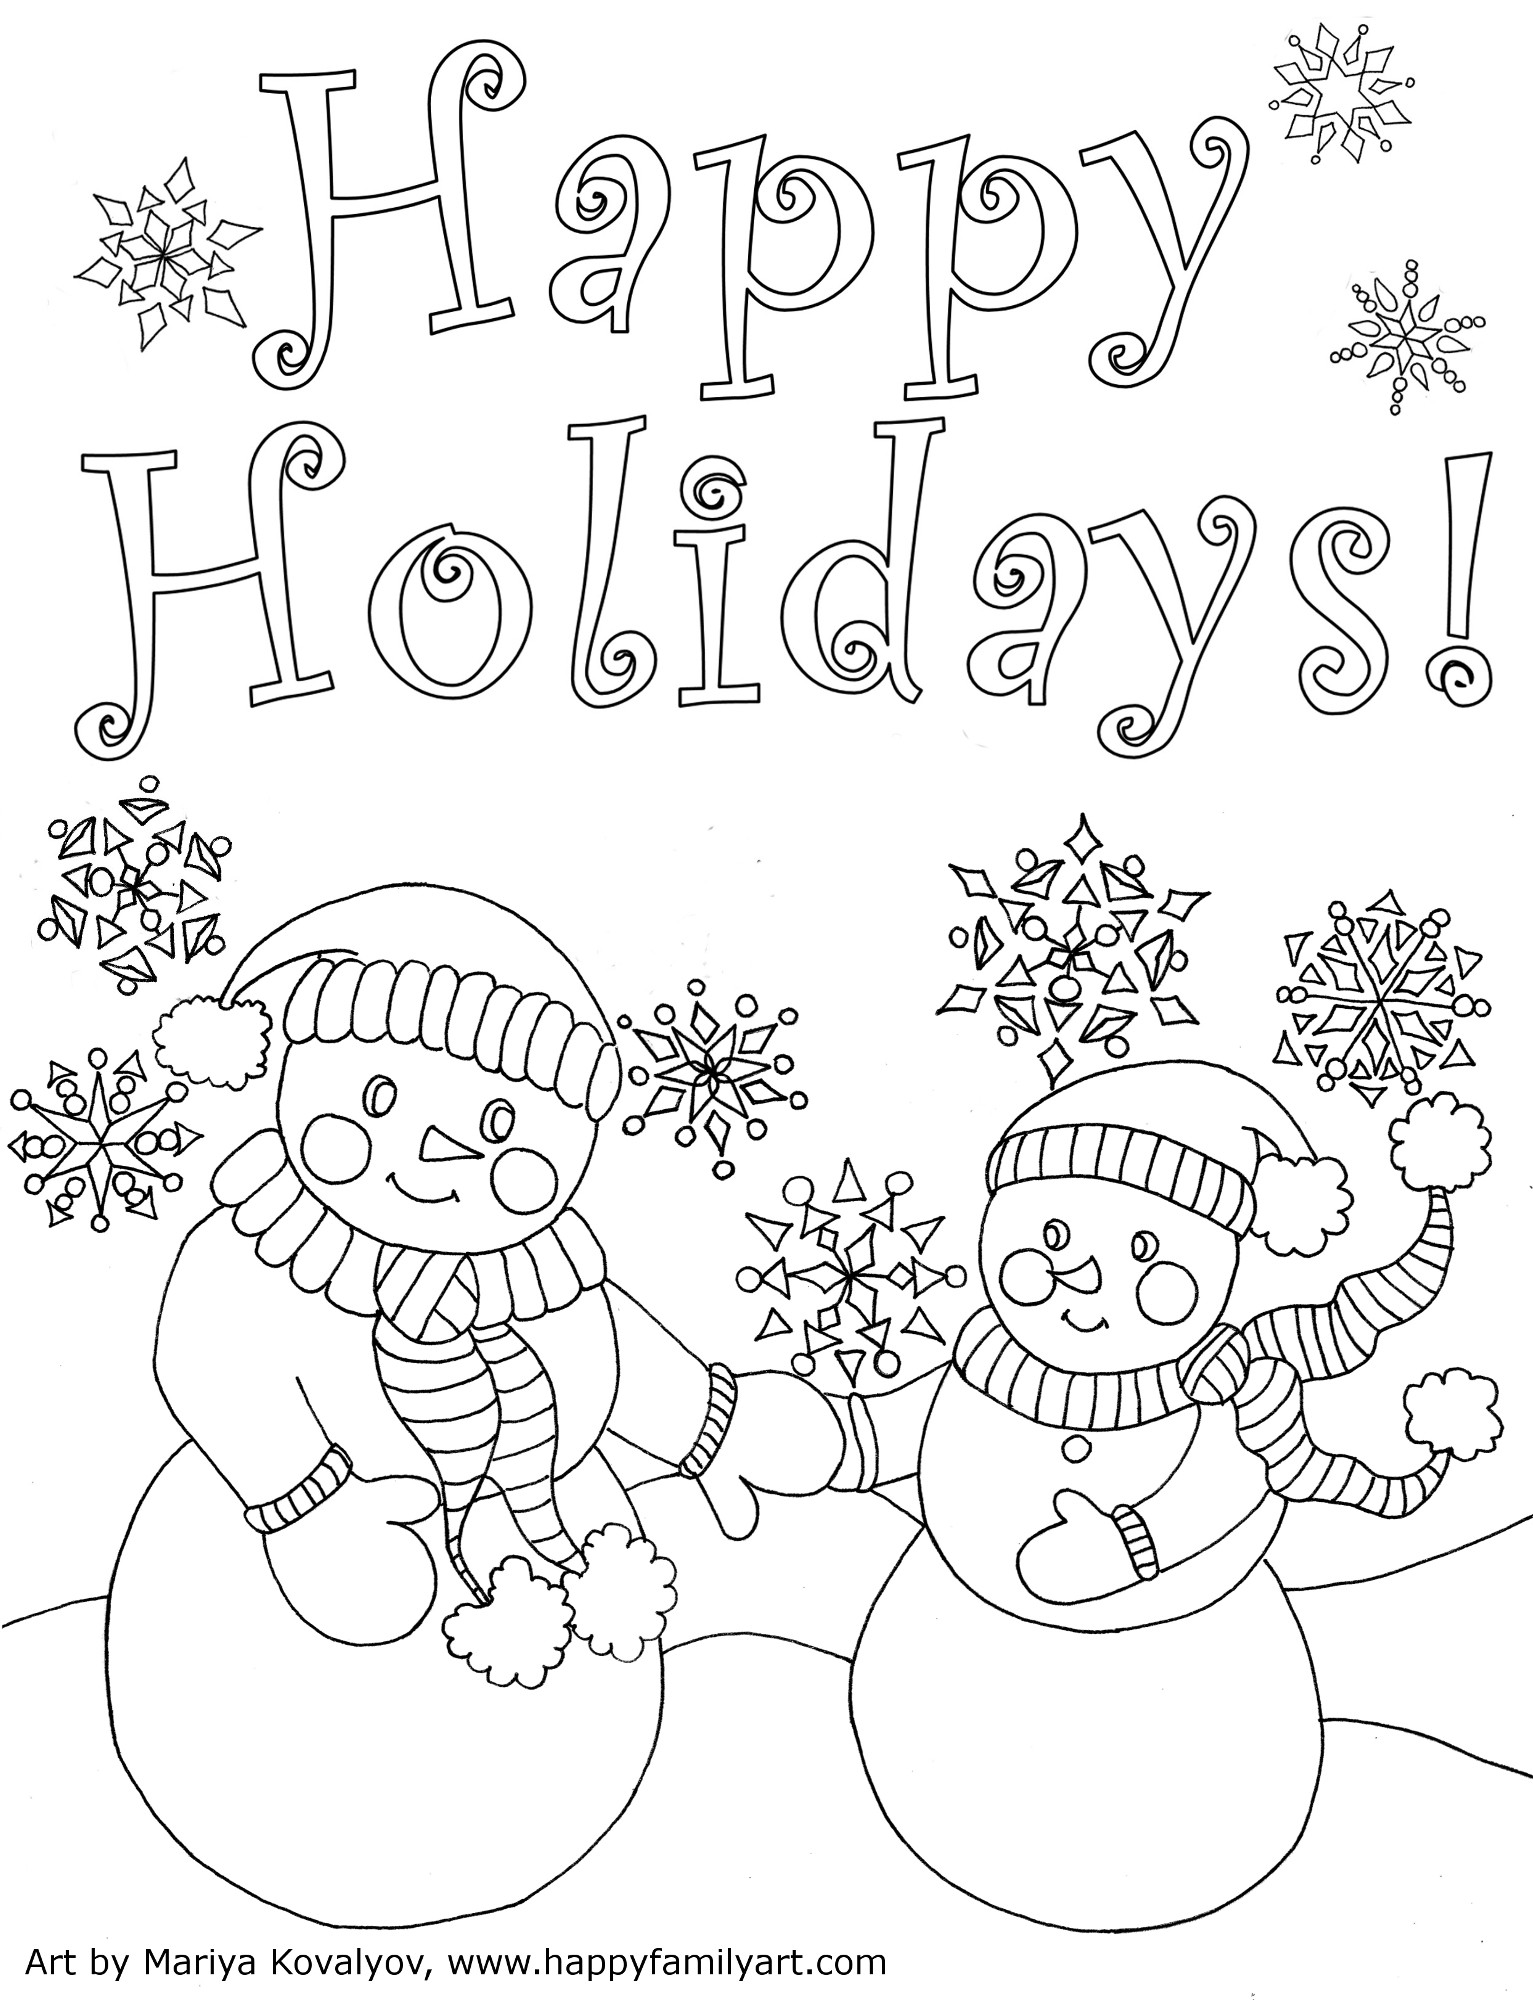 Printable Coloring Pages Christmas
 Happy Family Art original and fun coloring pages